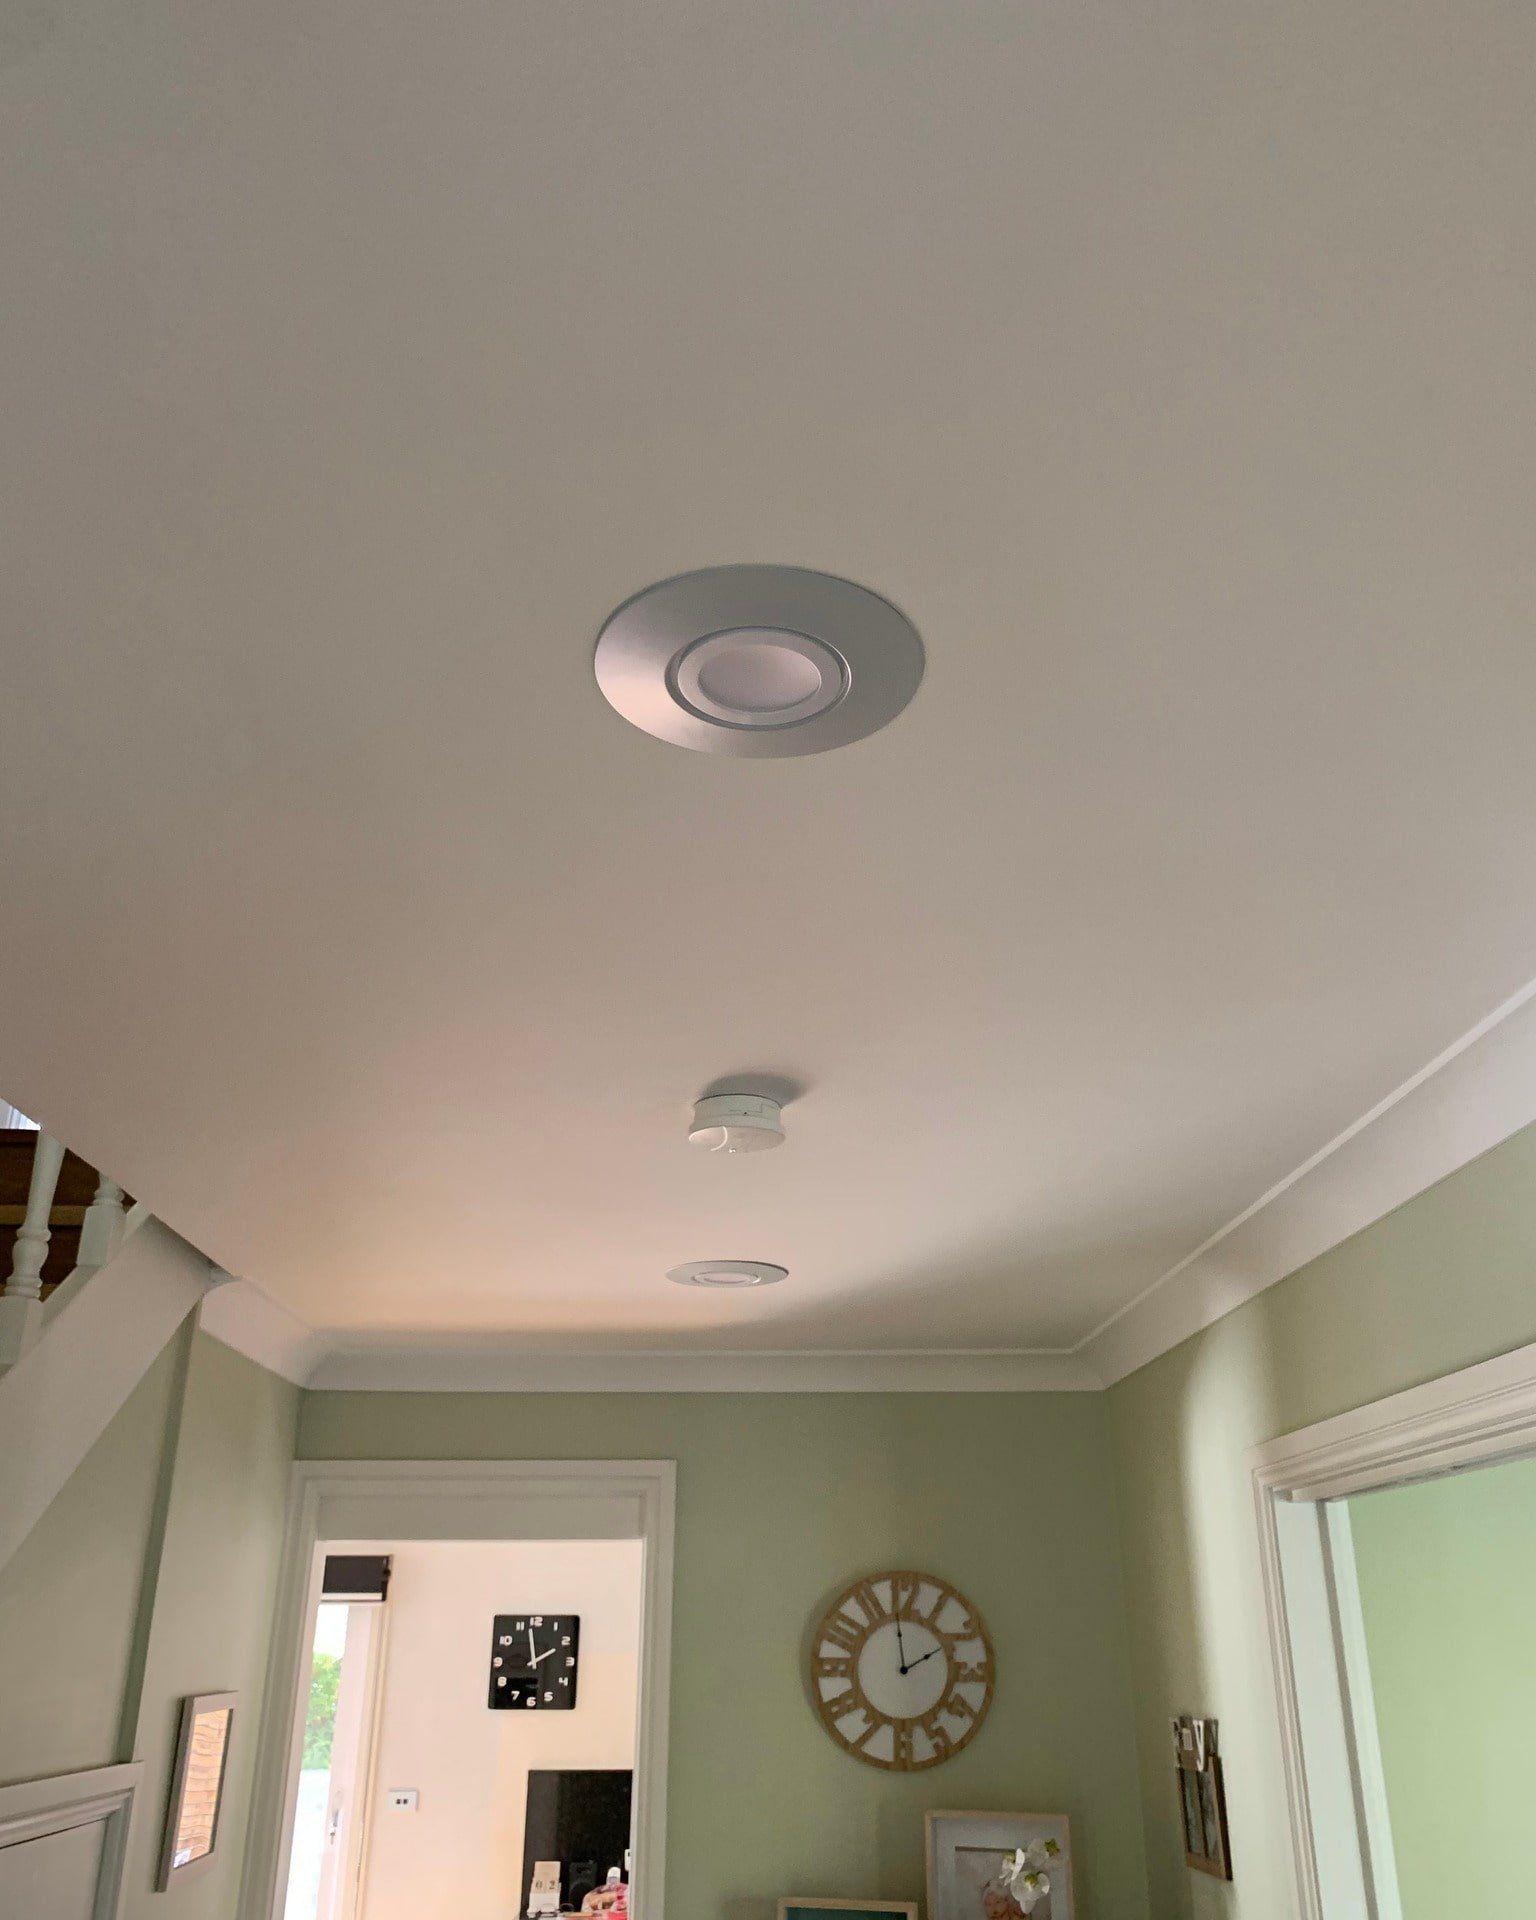 Electrical LED Lighting Installed In The House — Electrical, Heating & Air Conditioning in Wollongong, NSW